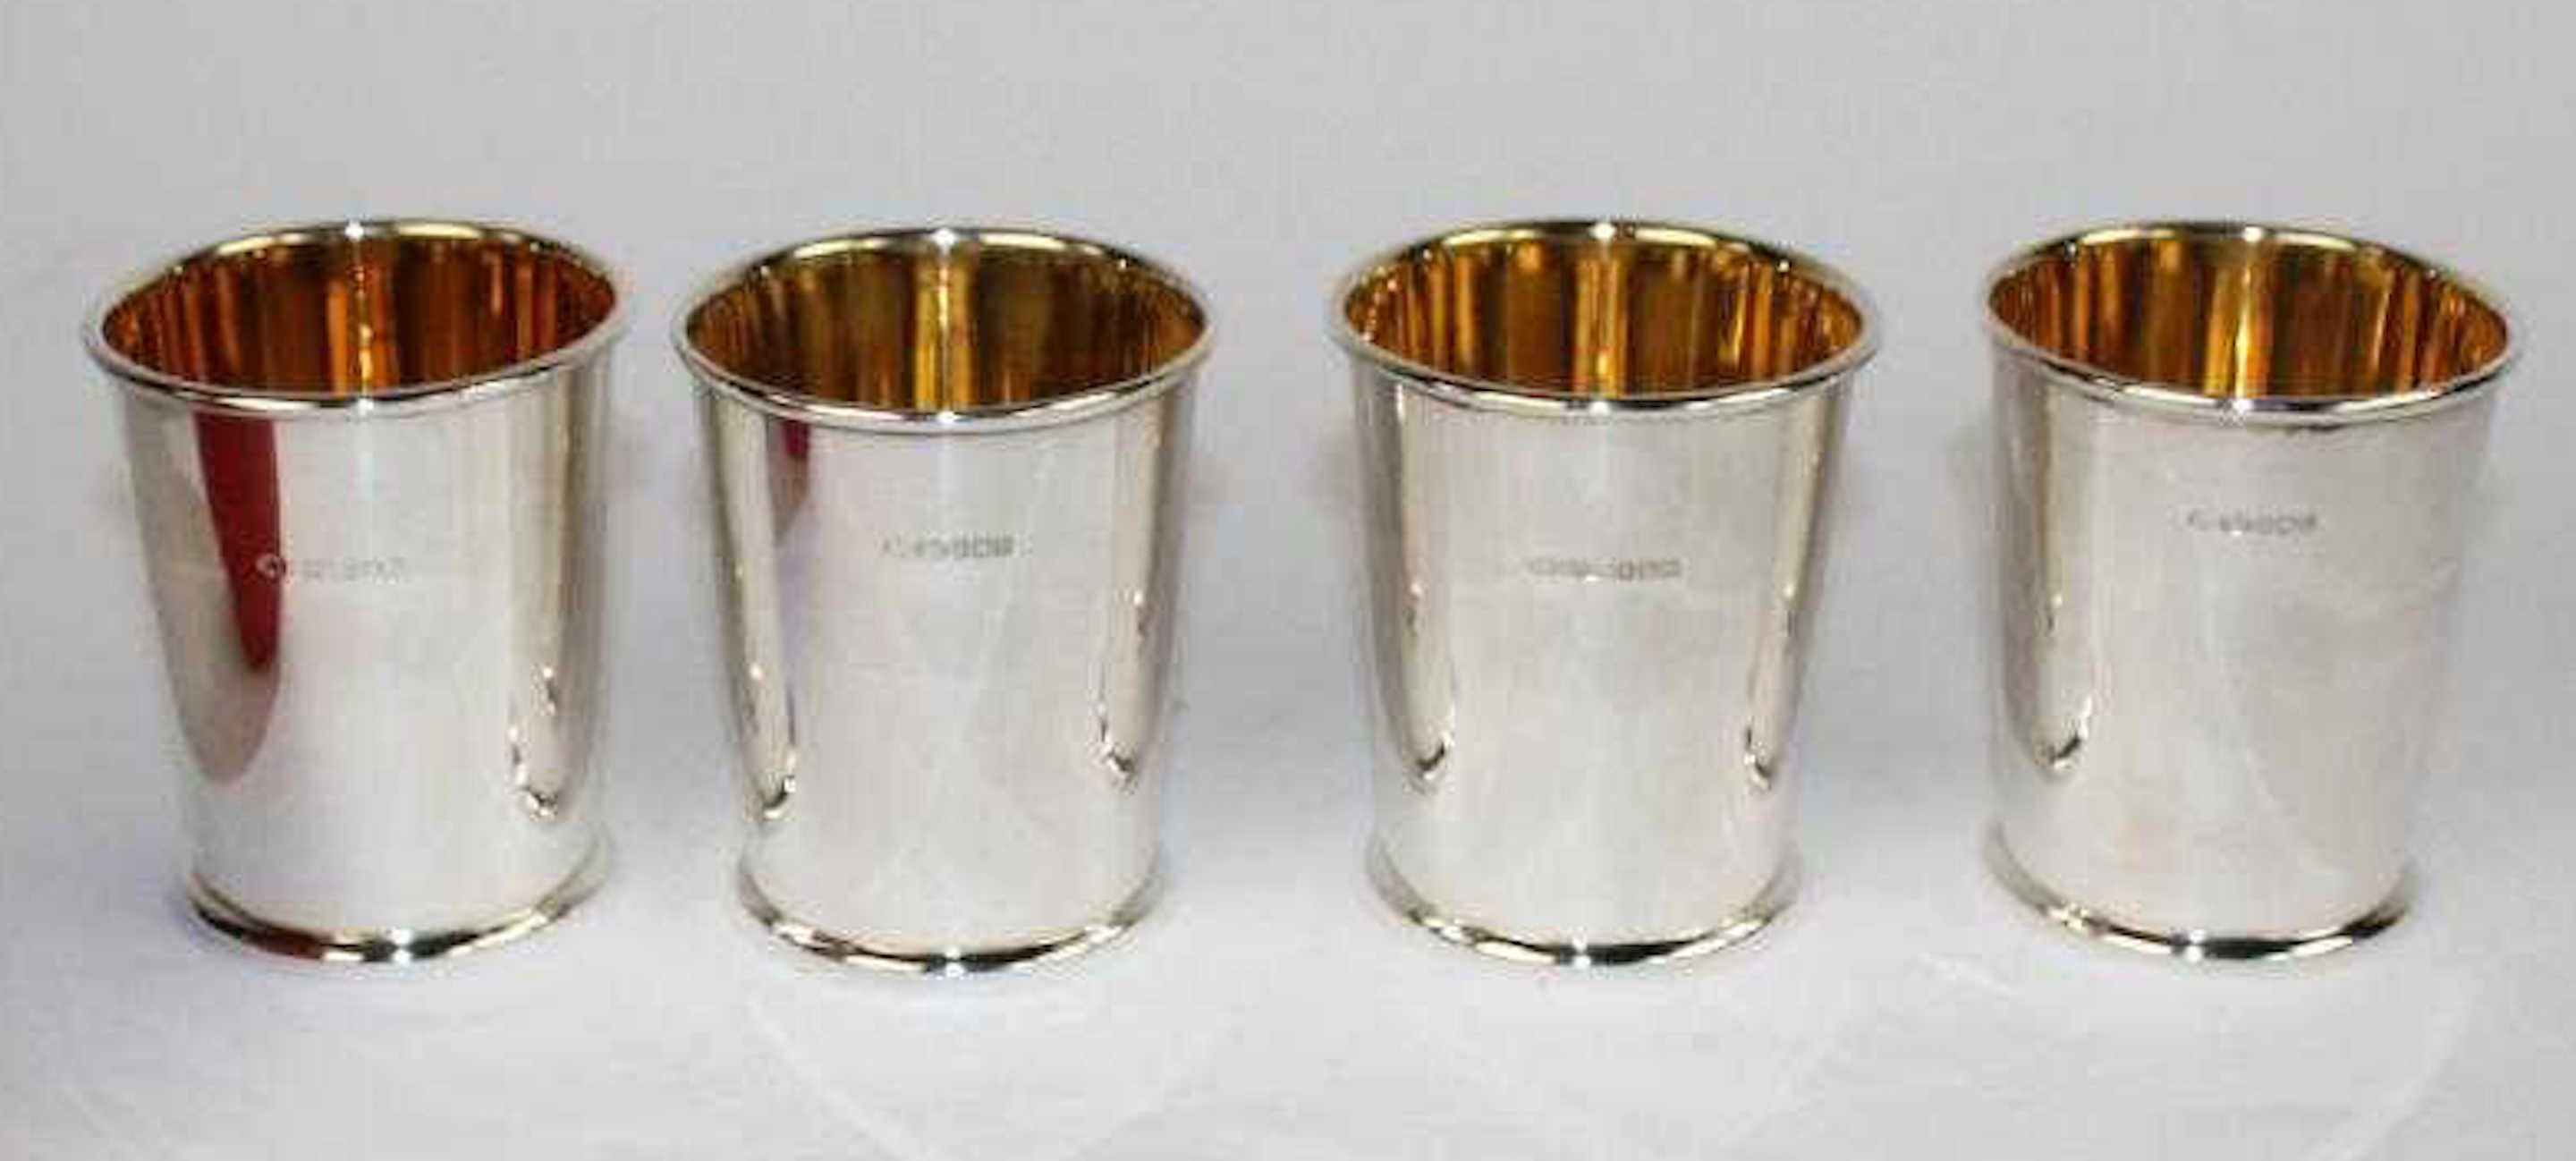 Four Scottish cast sterling mint Julep Cups, Edinburgh, 2005, retailed by Links, London. Each one of fine calibre with gold washed interior, with cast horseshoe at bottom.
Measures: Four 3